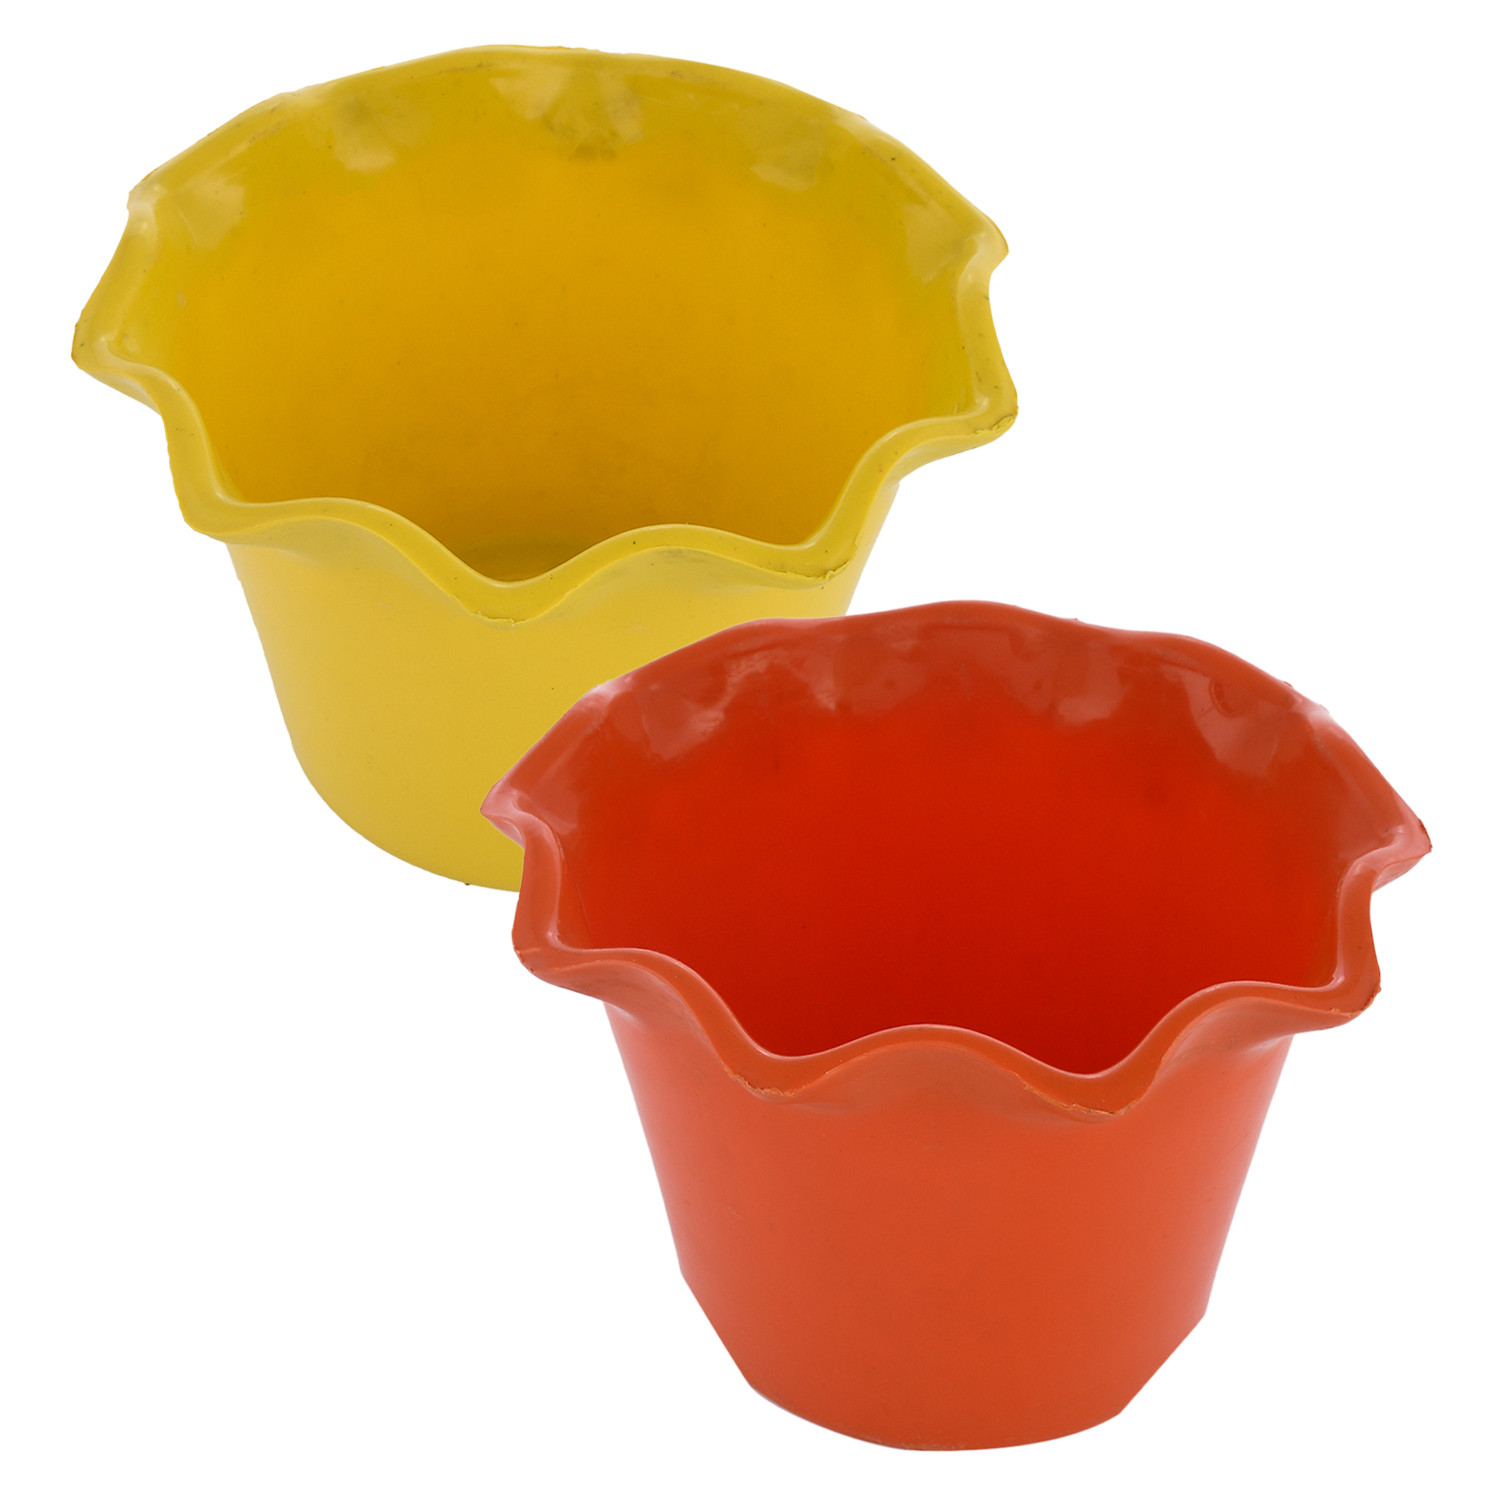 Kuber Industries Blossom Flower Pot|Durable Plastic Flower Pot|Gamla With Drain Holes for Home Décor|Balcony|Garden|8 Inch|Pack of 2 (Orange & Yellow)